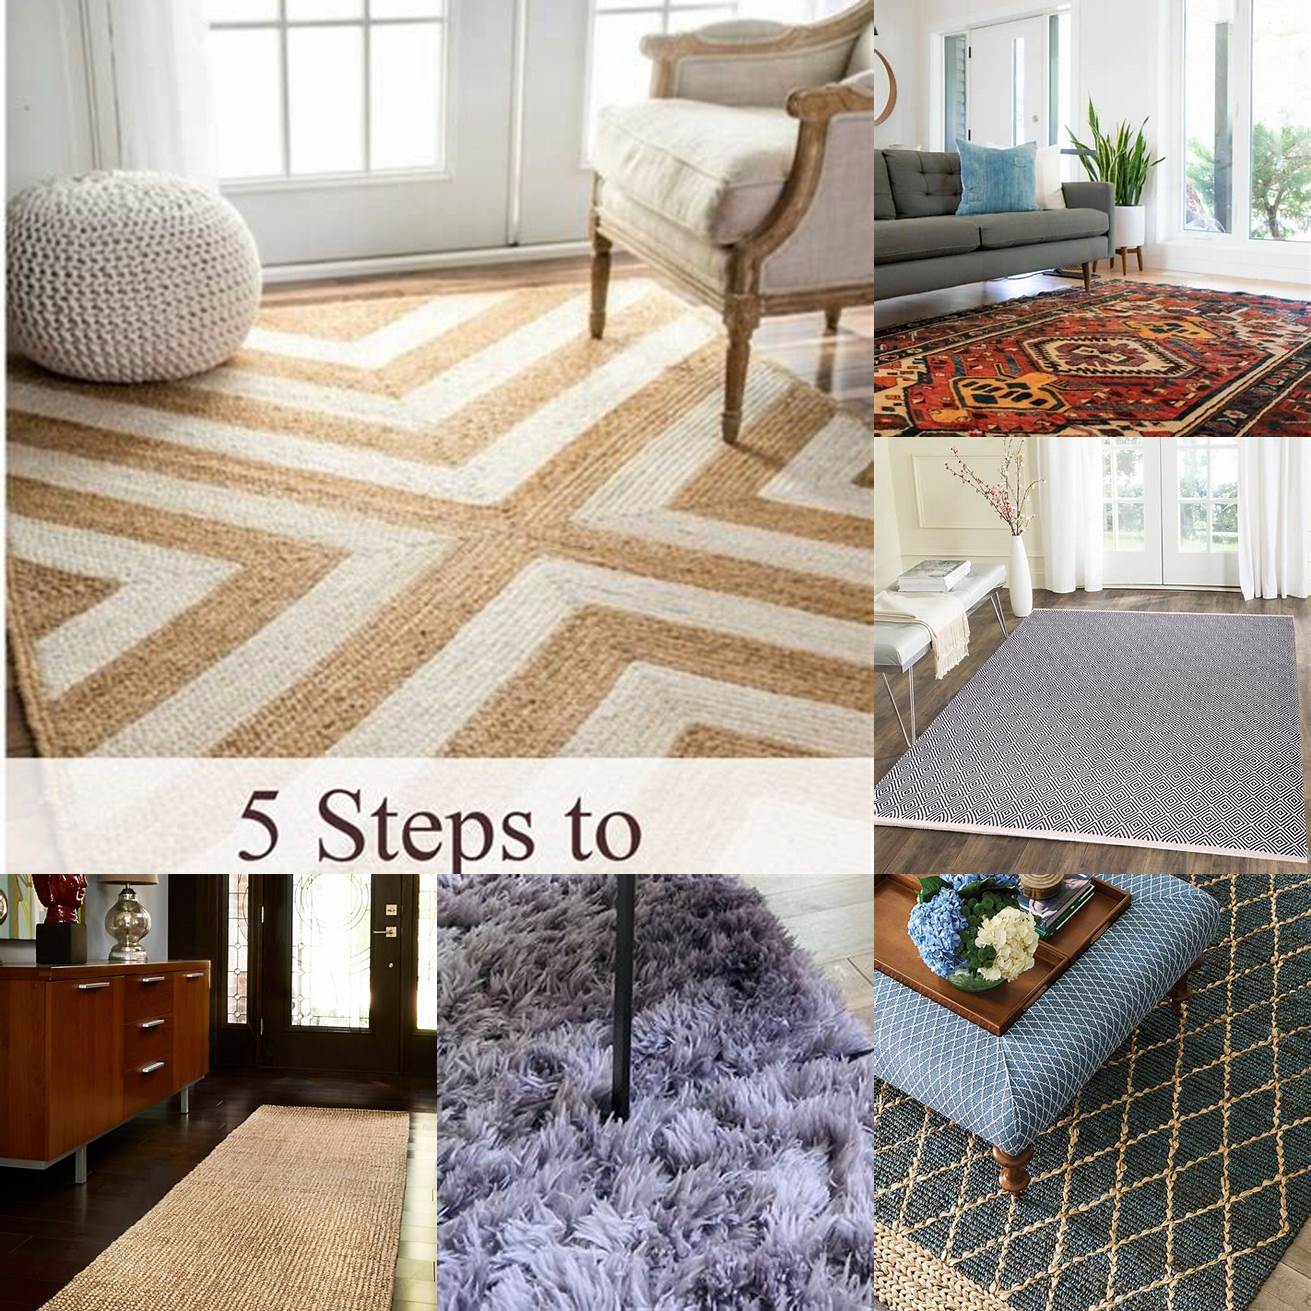 Choose a rug that is easy to clean and maintain